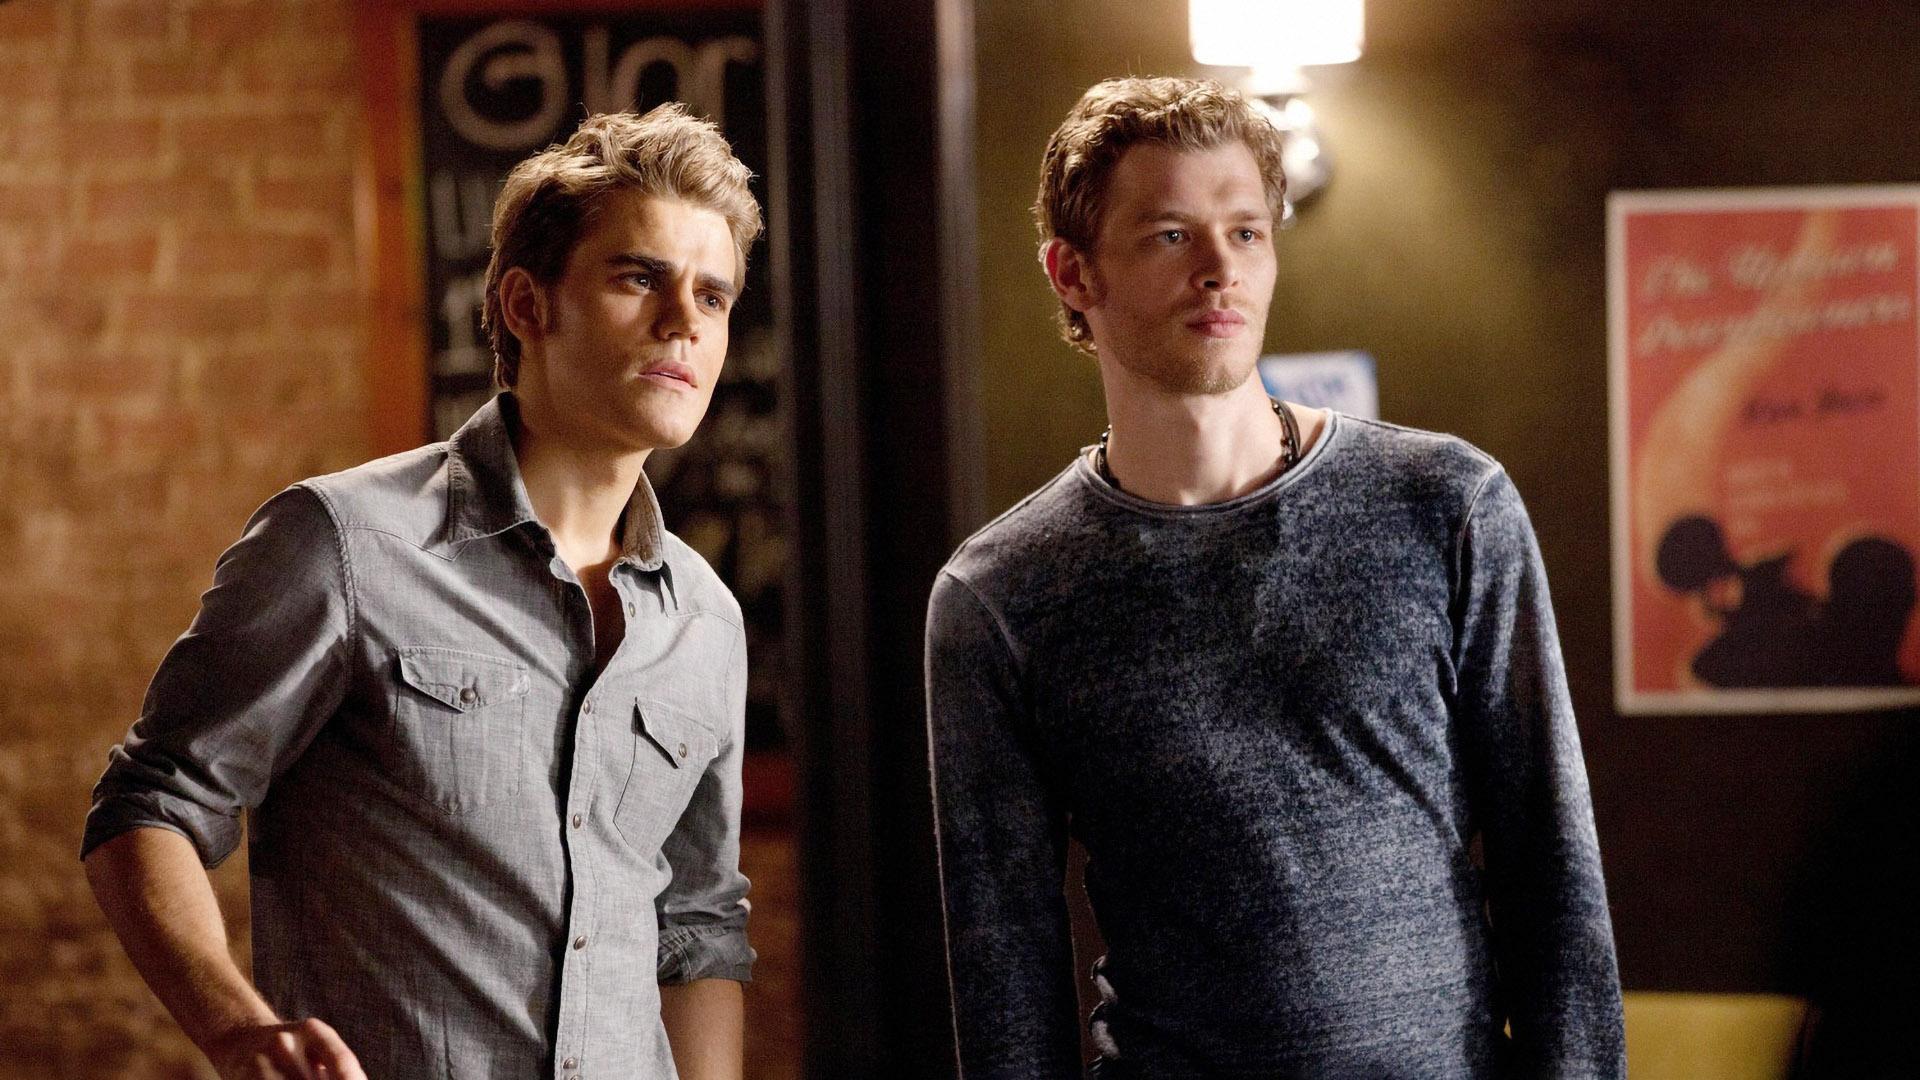 5 Vampire Diaries Storylines So Cringey, We'd Rather Pretend They Don't Exist